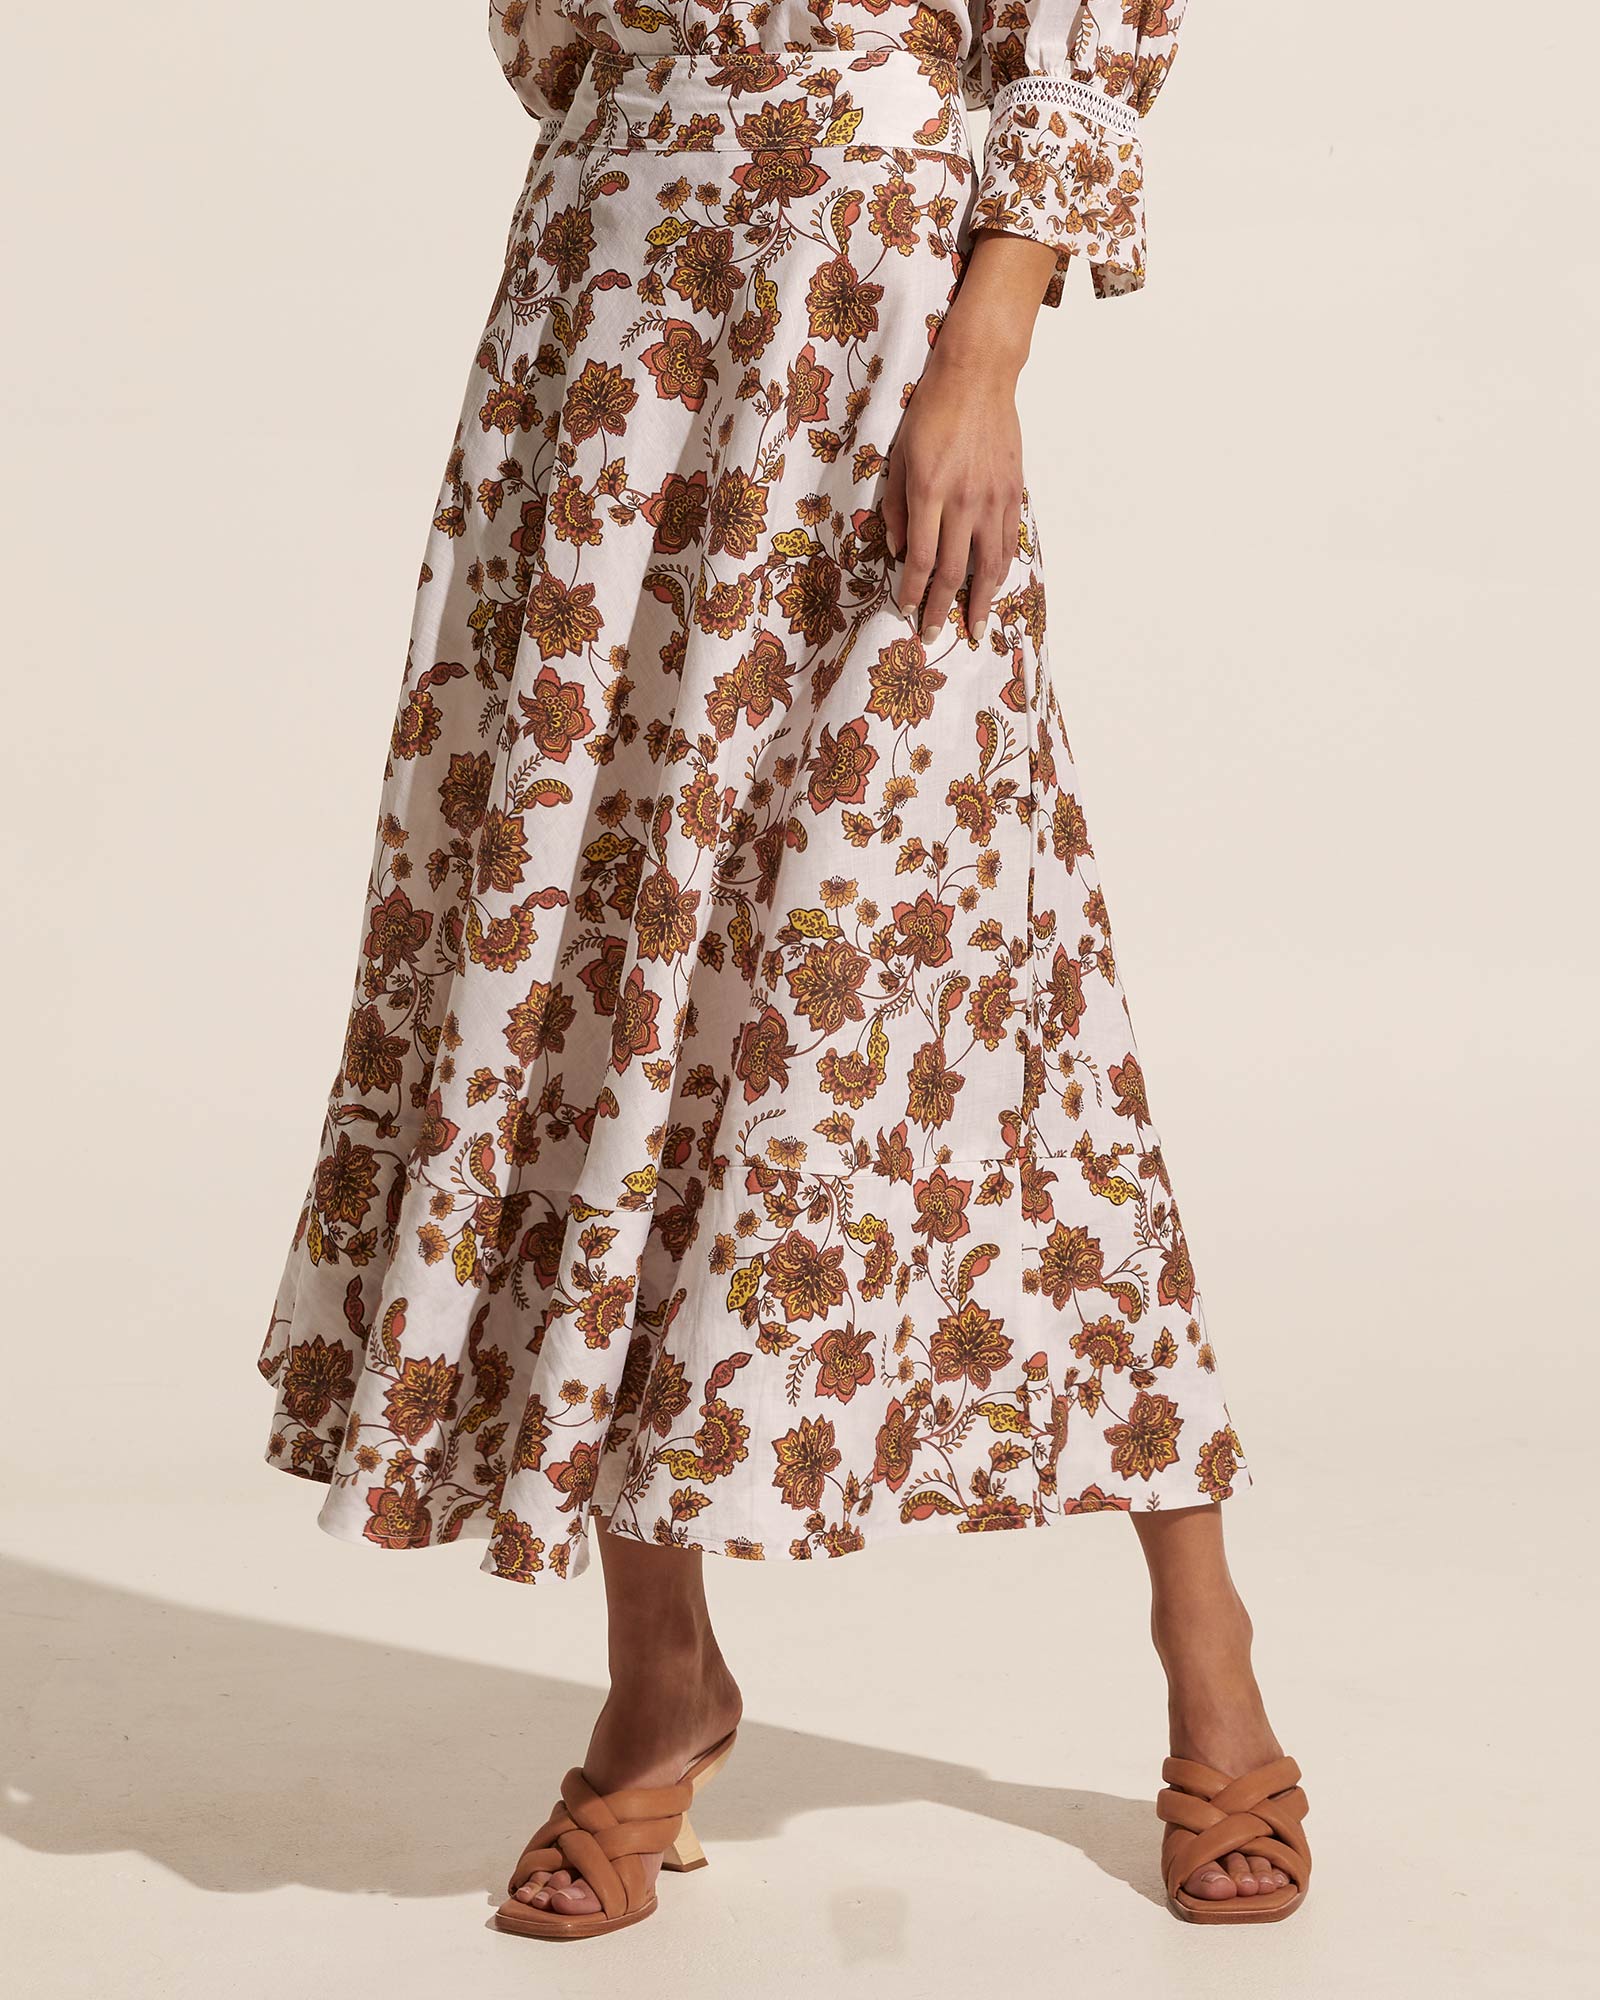 freedom skirt - spice floral